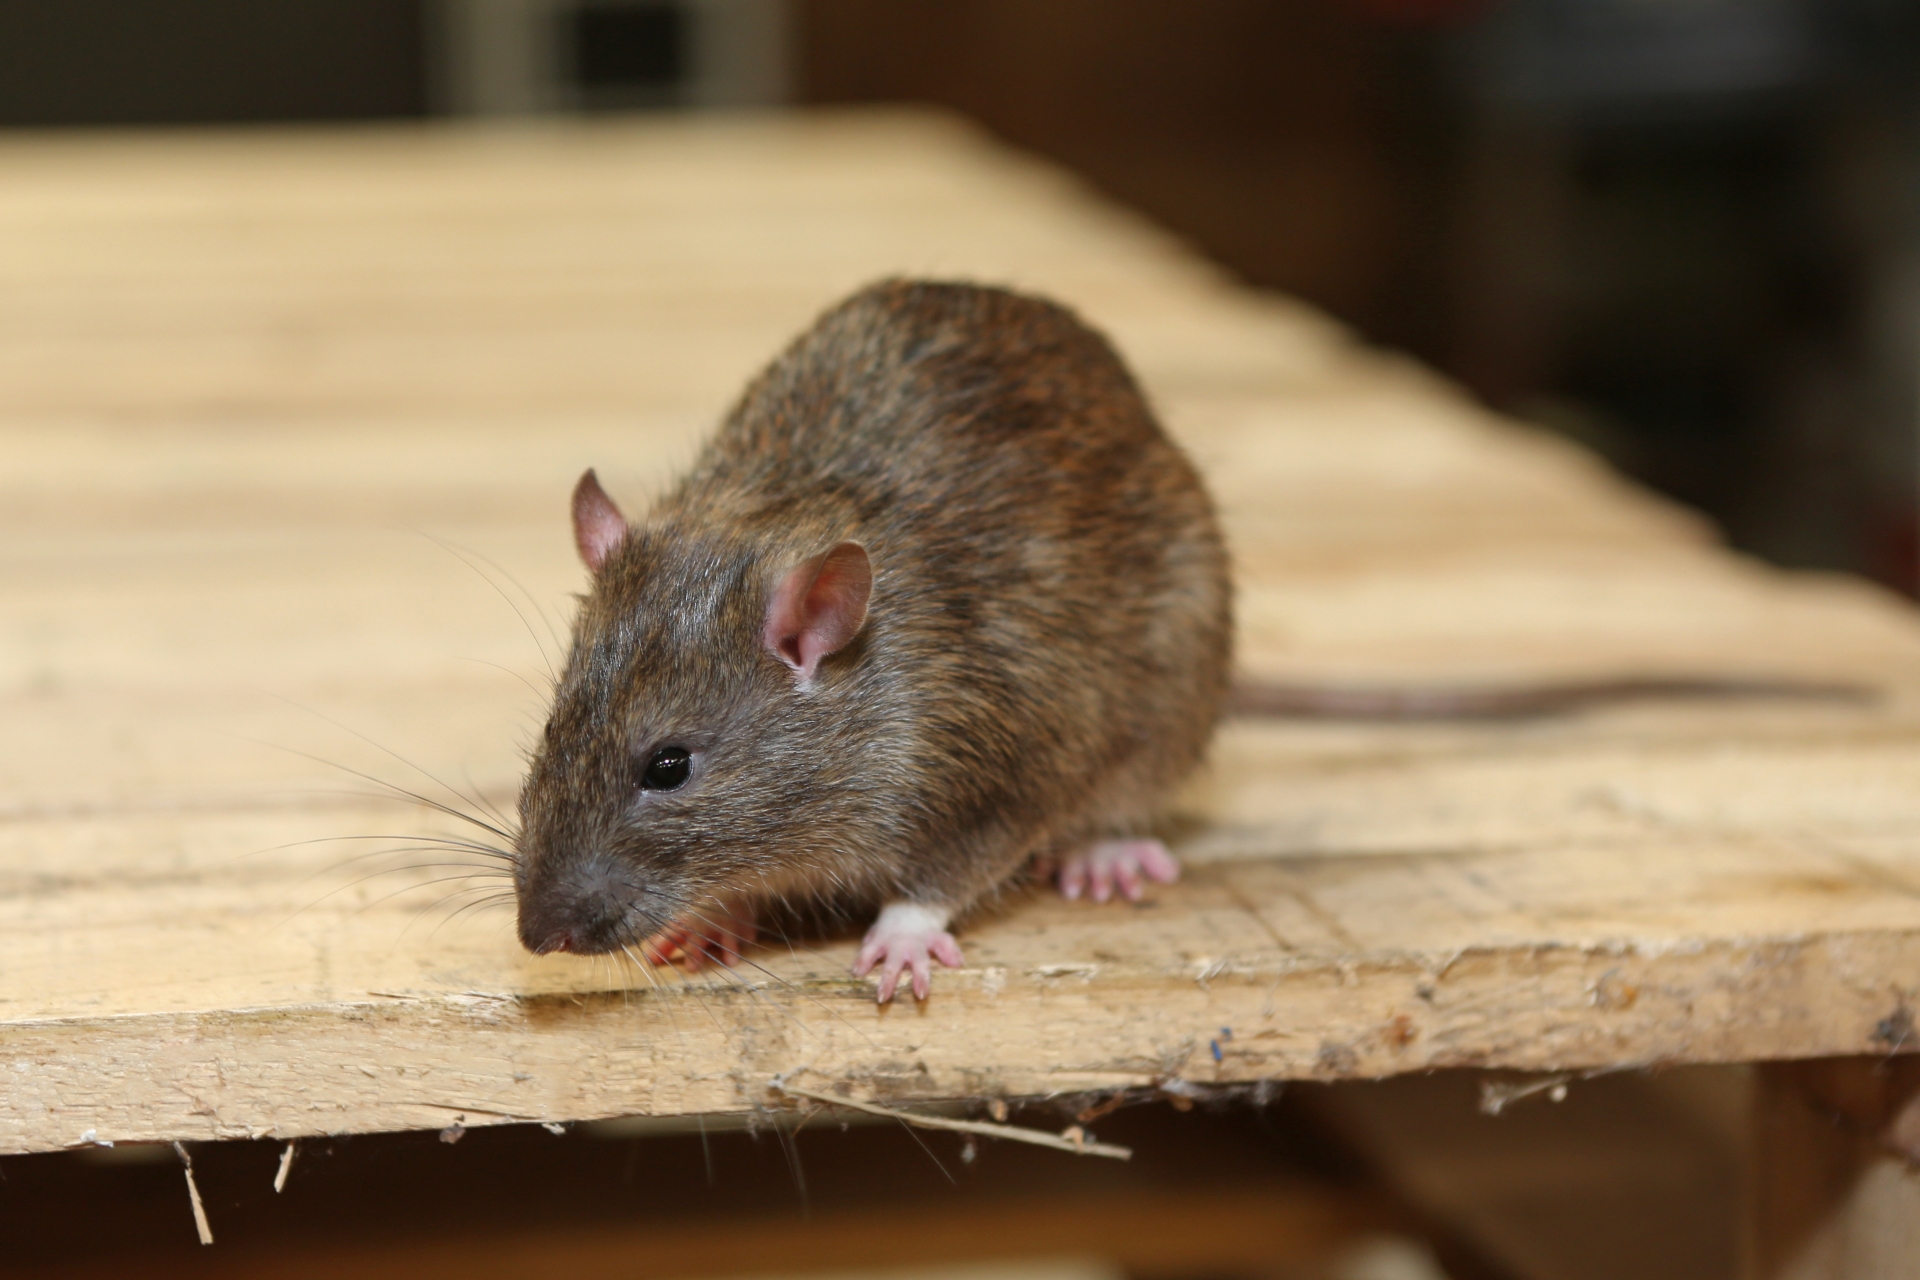 Rat extermination, Pest Control in Kingston upon Thames, KT1. Call Now 020 8166 9746